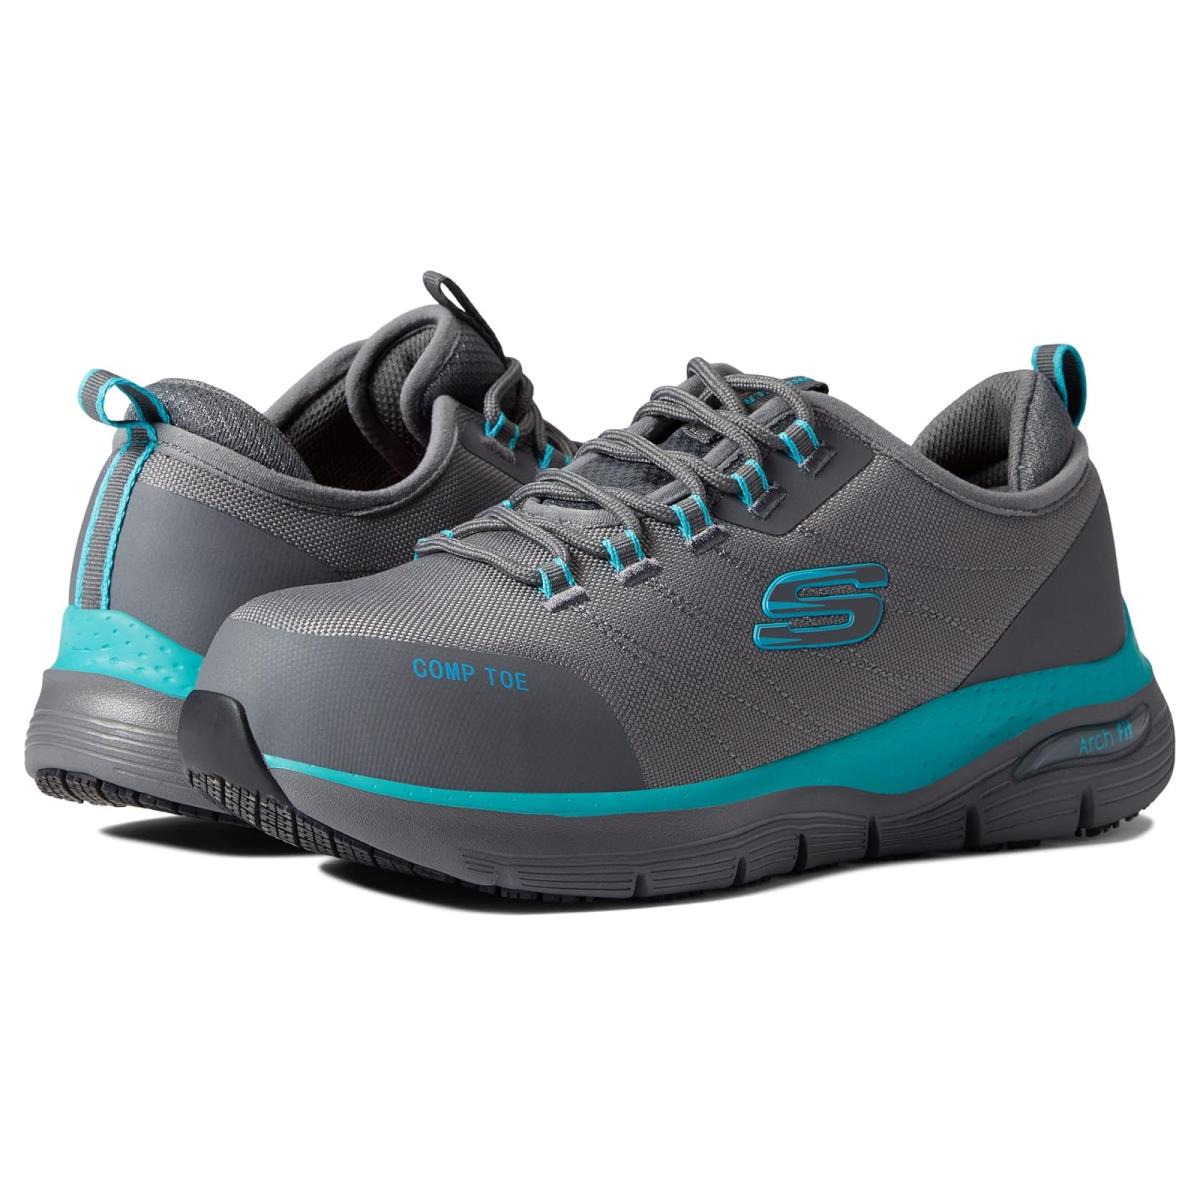 Woman`s Sneakers Athletic Shoes Skechers Work Arch Fit SR Composite Toe Gray/Aqua